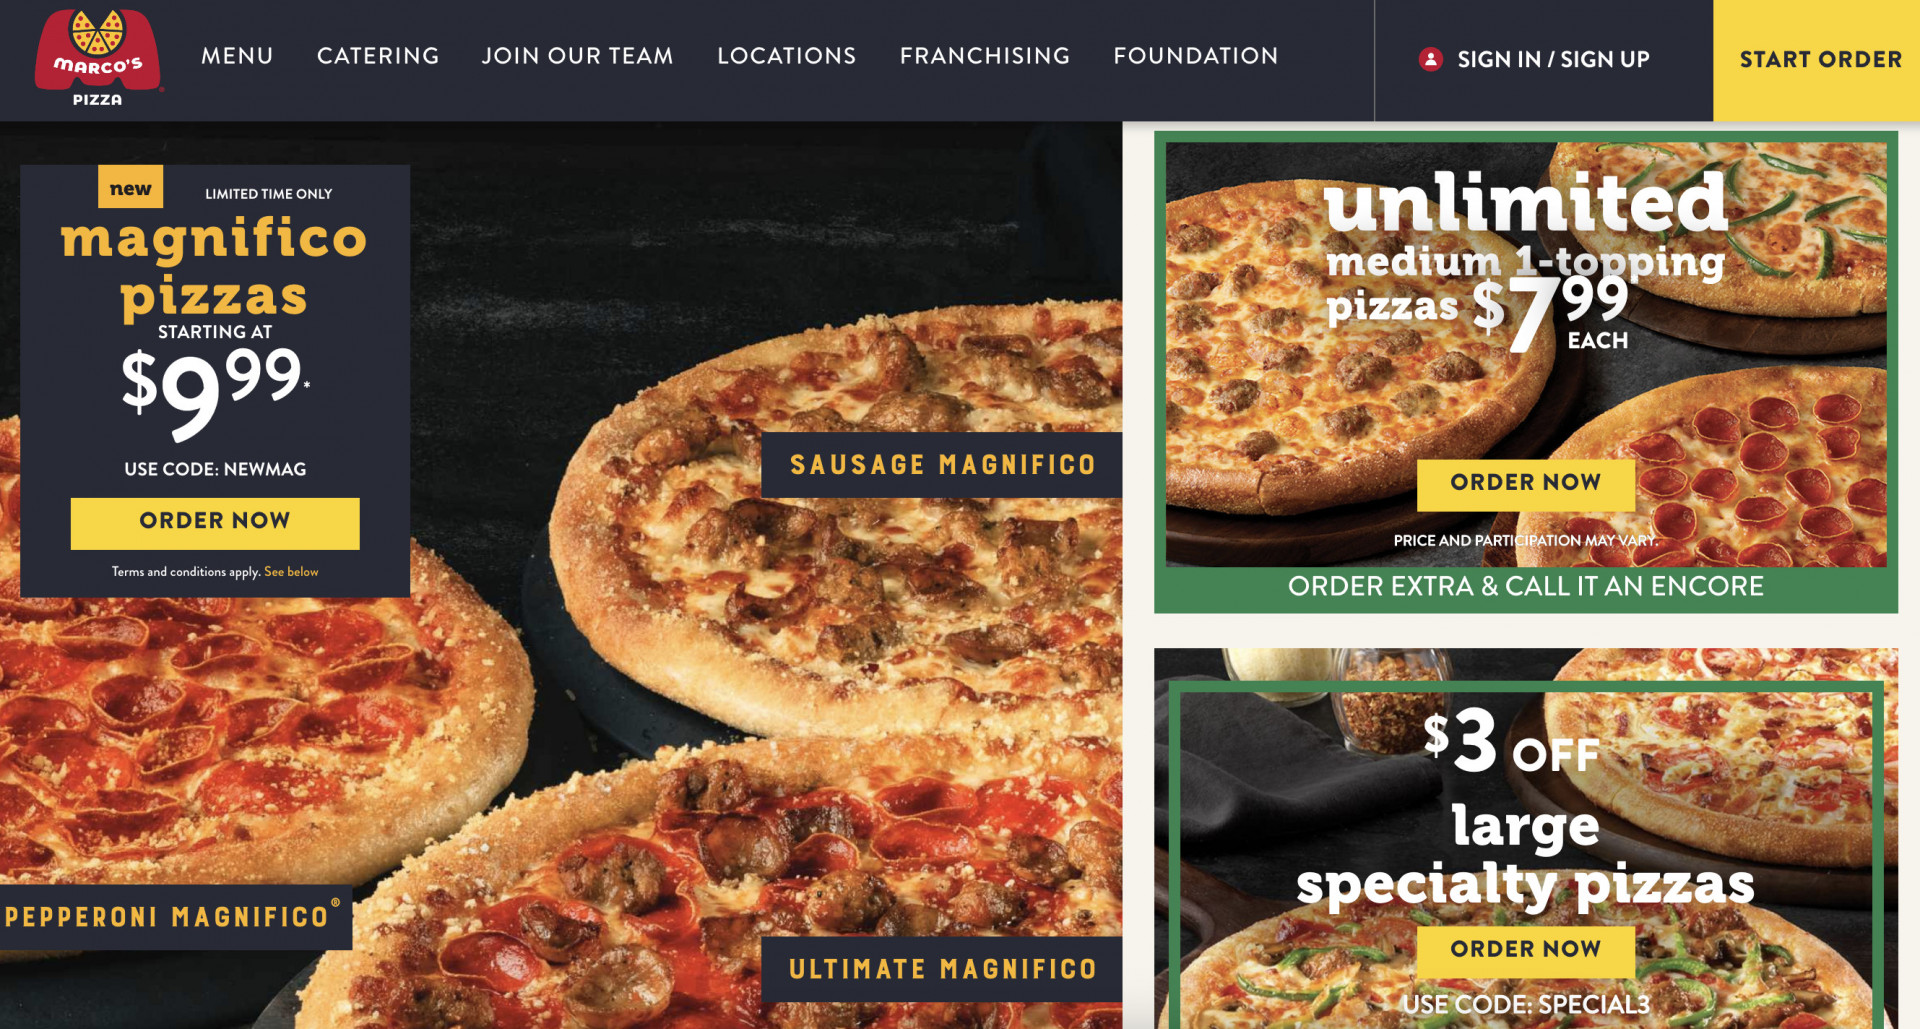 pizza website template example Marco’s Pizza